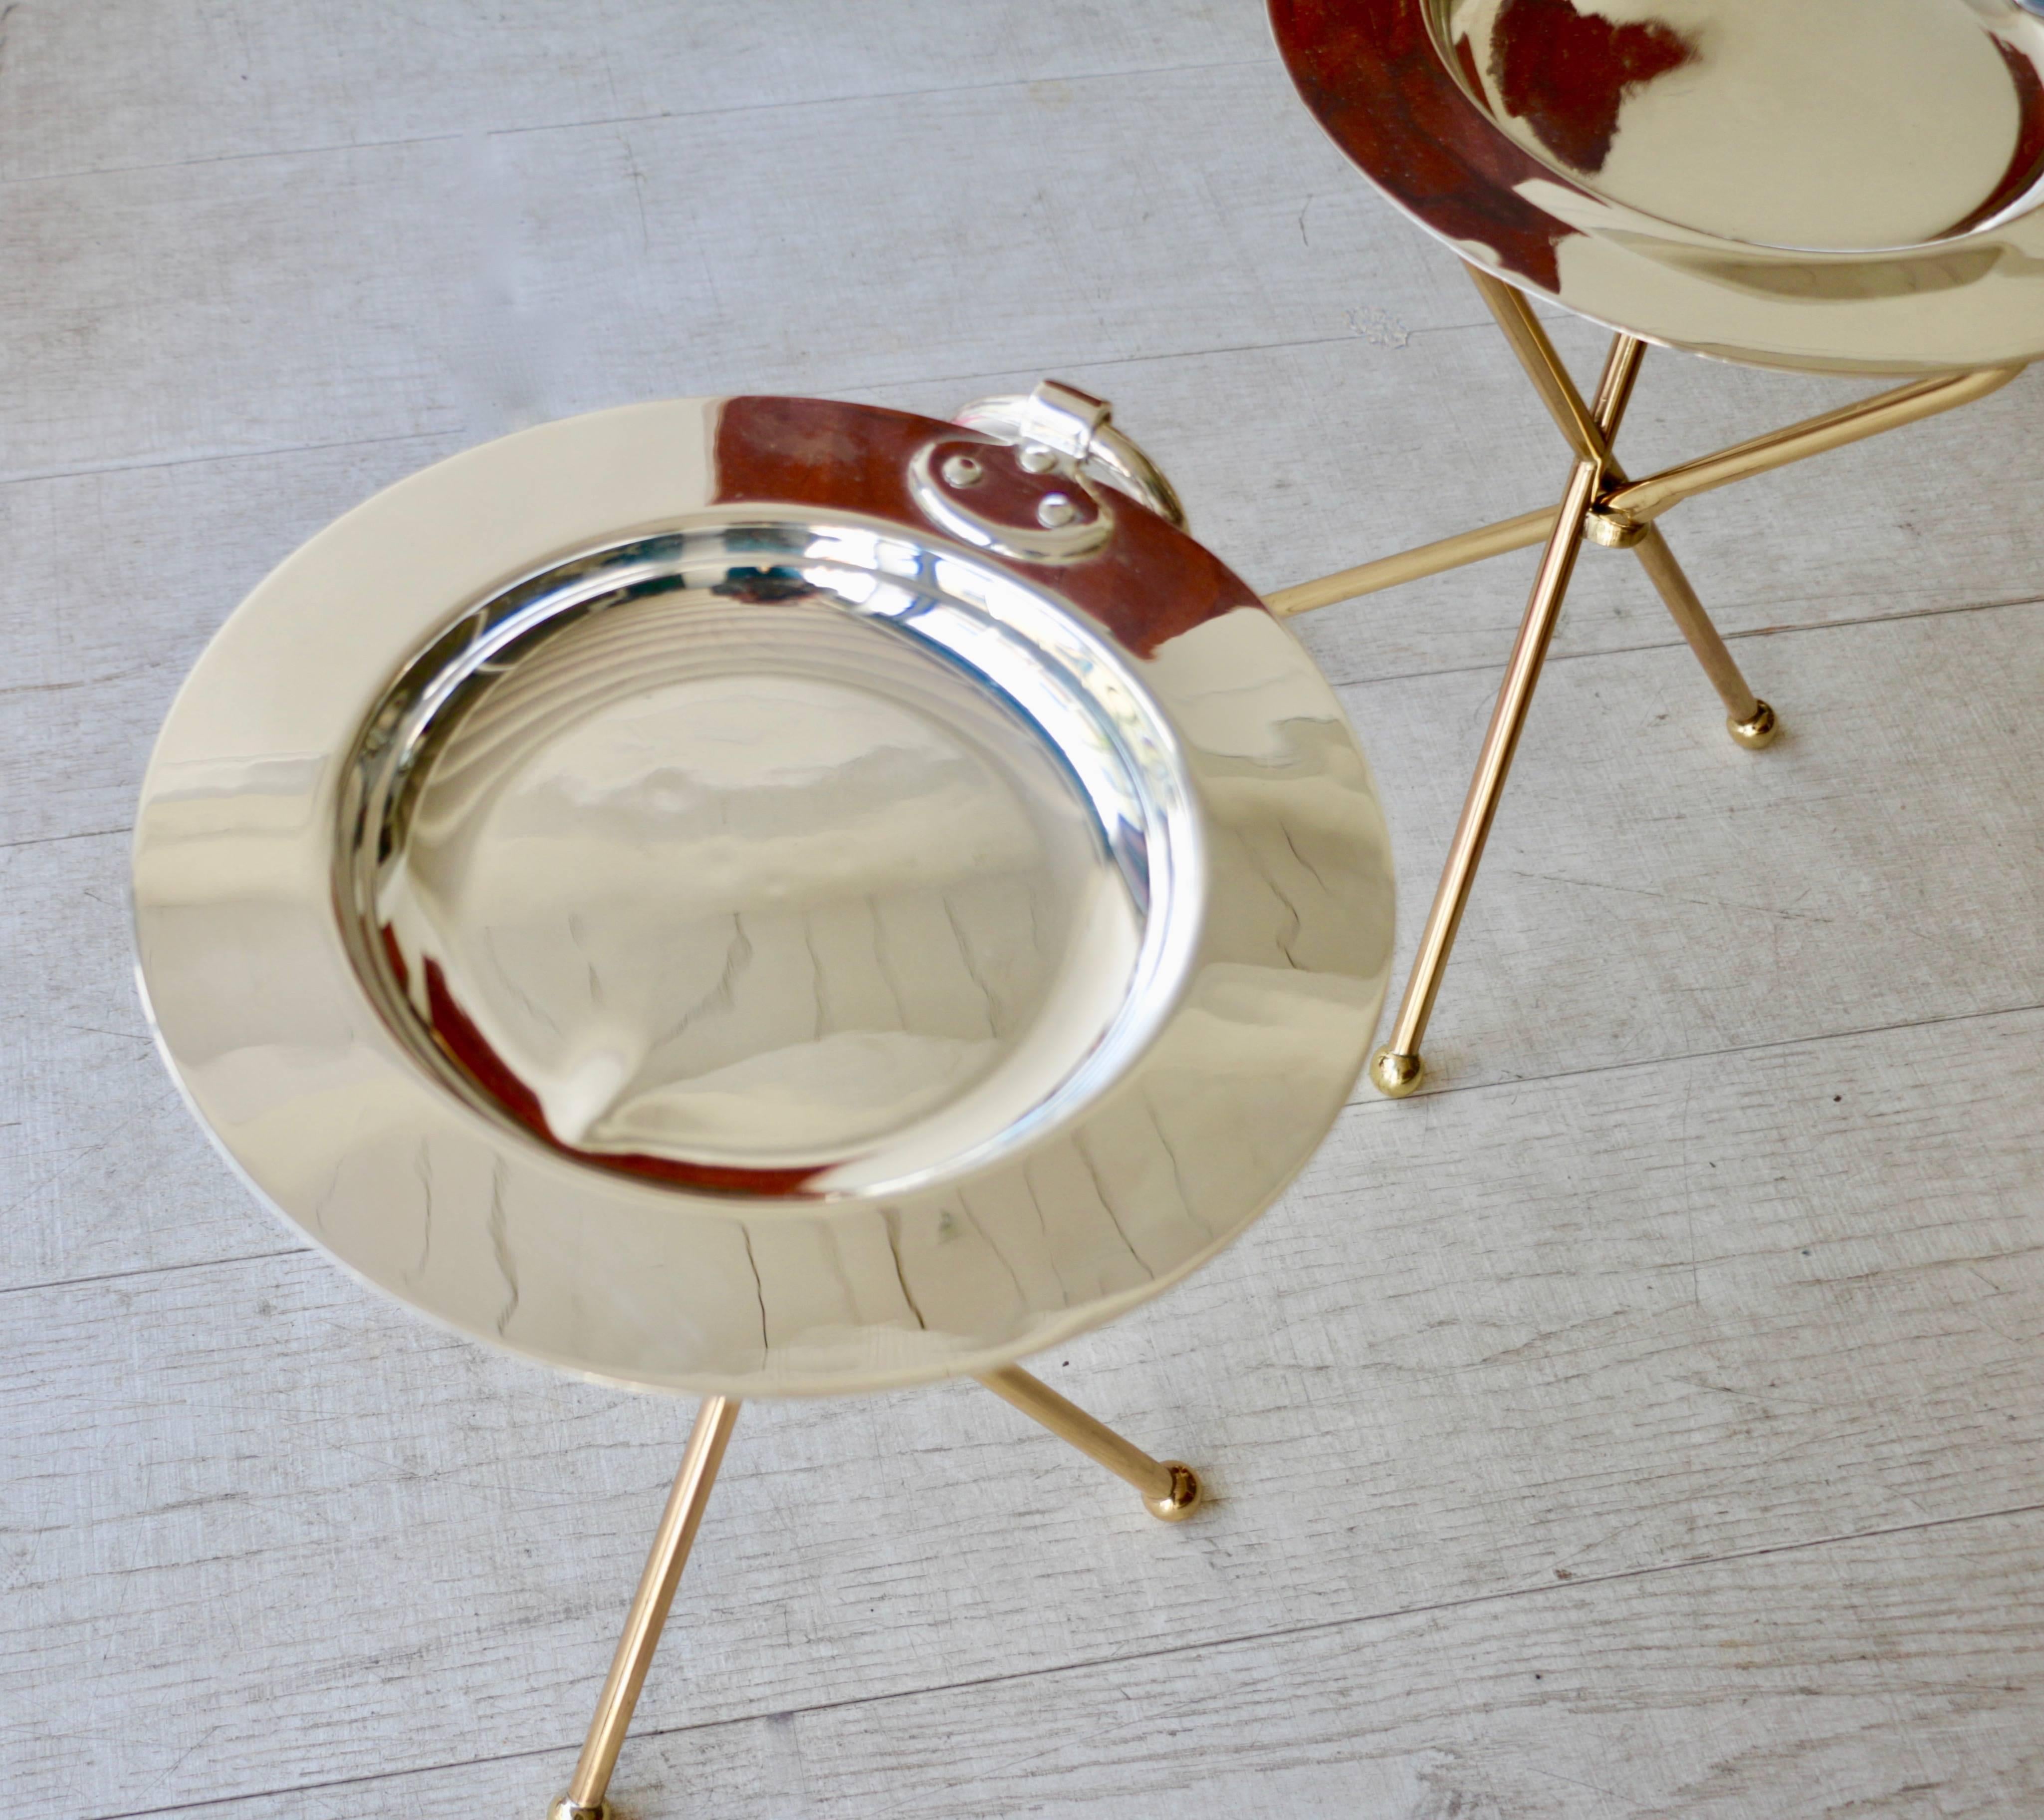 1980s, pair of small folding gueridons. The tray is made of silvered metal and the feet are in brass. A large ring allows to transport them. One of the trays should be re-silvered. Signature.